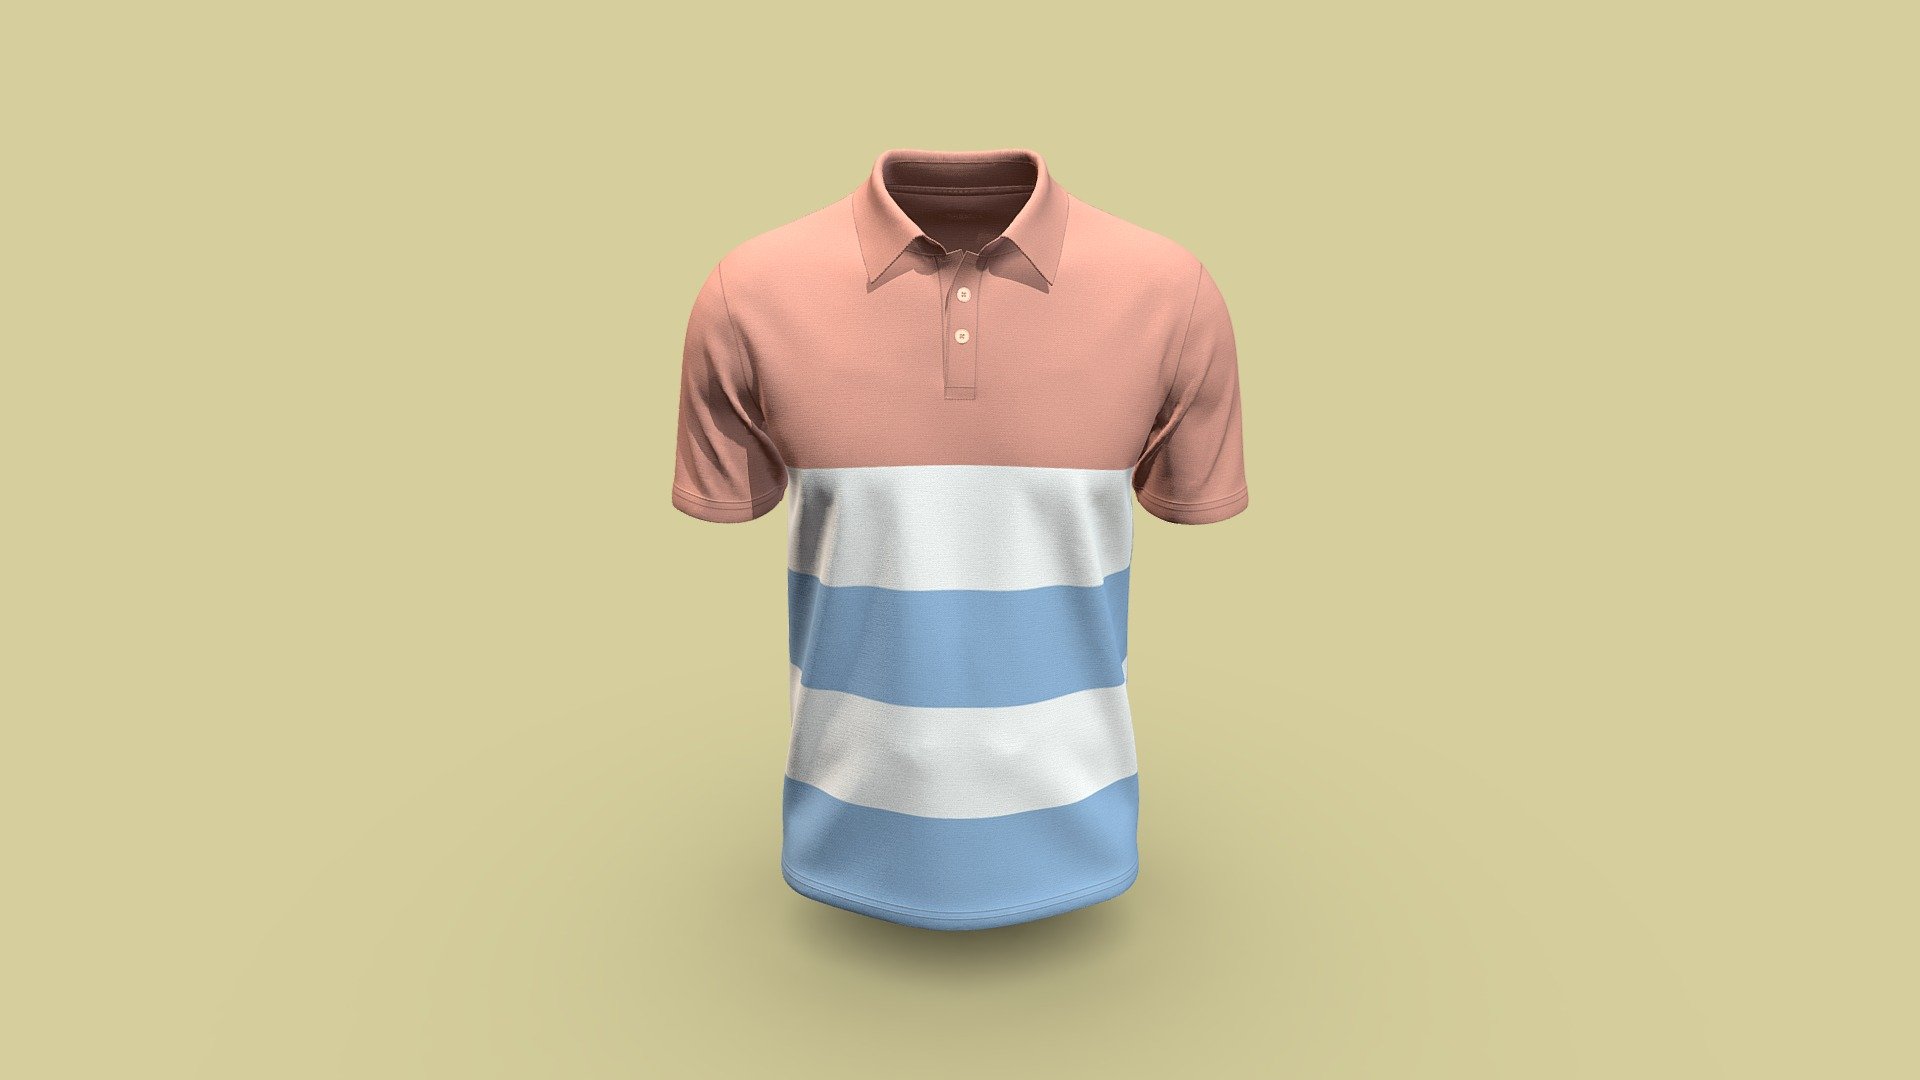 Cloth Title = 3D Mens Knit Polo Shirt 

SKU = DG100202 

Category = Men 

Product Type = Polo 

Cloth Length = Regular 

Body Fit = Regular Fit 

Occasion = Casual  

Sleeve Style = Short Sleeve 


Our Services:

3D Apparel Design.

OBJ,FBX,GLTF Making with High/Low Poly.

Fabric Digitalization.

Mockup making.

3D Teck Pack.

Pattern Making.

2D Illustration.

Cloth Animation and 360 Spin Video.


Contact us:- 

Email: info@digitalfashionwear.com 

Website: https://digitalfashionwear.com 


We designed all the types of cloth specially focused on product visualization, e-commerce, fitting, and production. 

We will design: 

T-shirts 

Polo shirts 

Hoodies 

Sweatshirt 

Jackets 

Shirts 

TankTops 

Trousers 

Bras 

Underwear 

Blazer 

Aprons 

Leggings 

and All Fashion items. 





Our goal is to make sure what we provide you, meets your demand 3d model